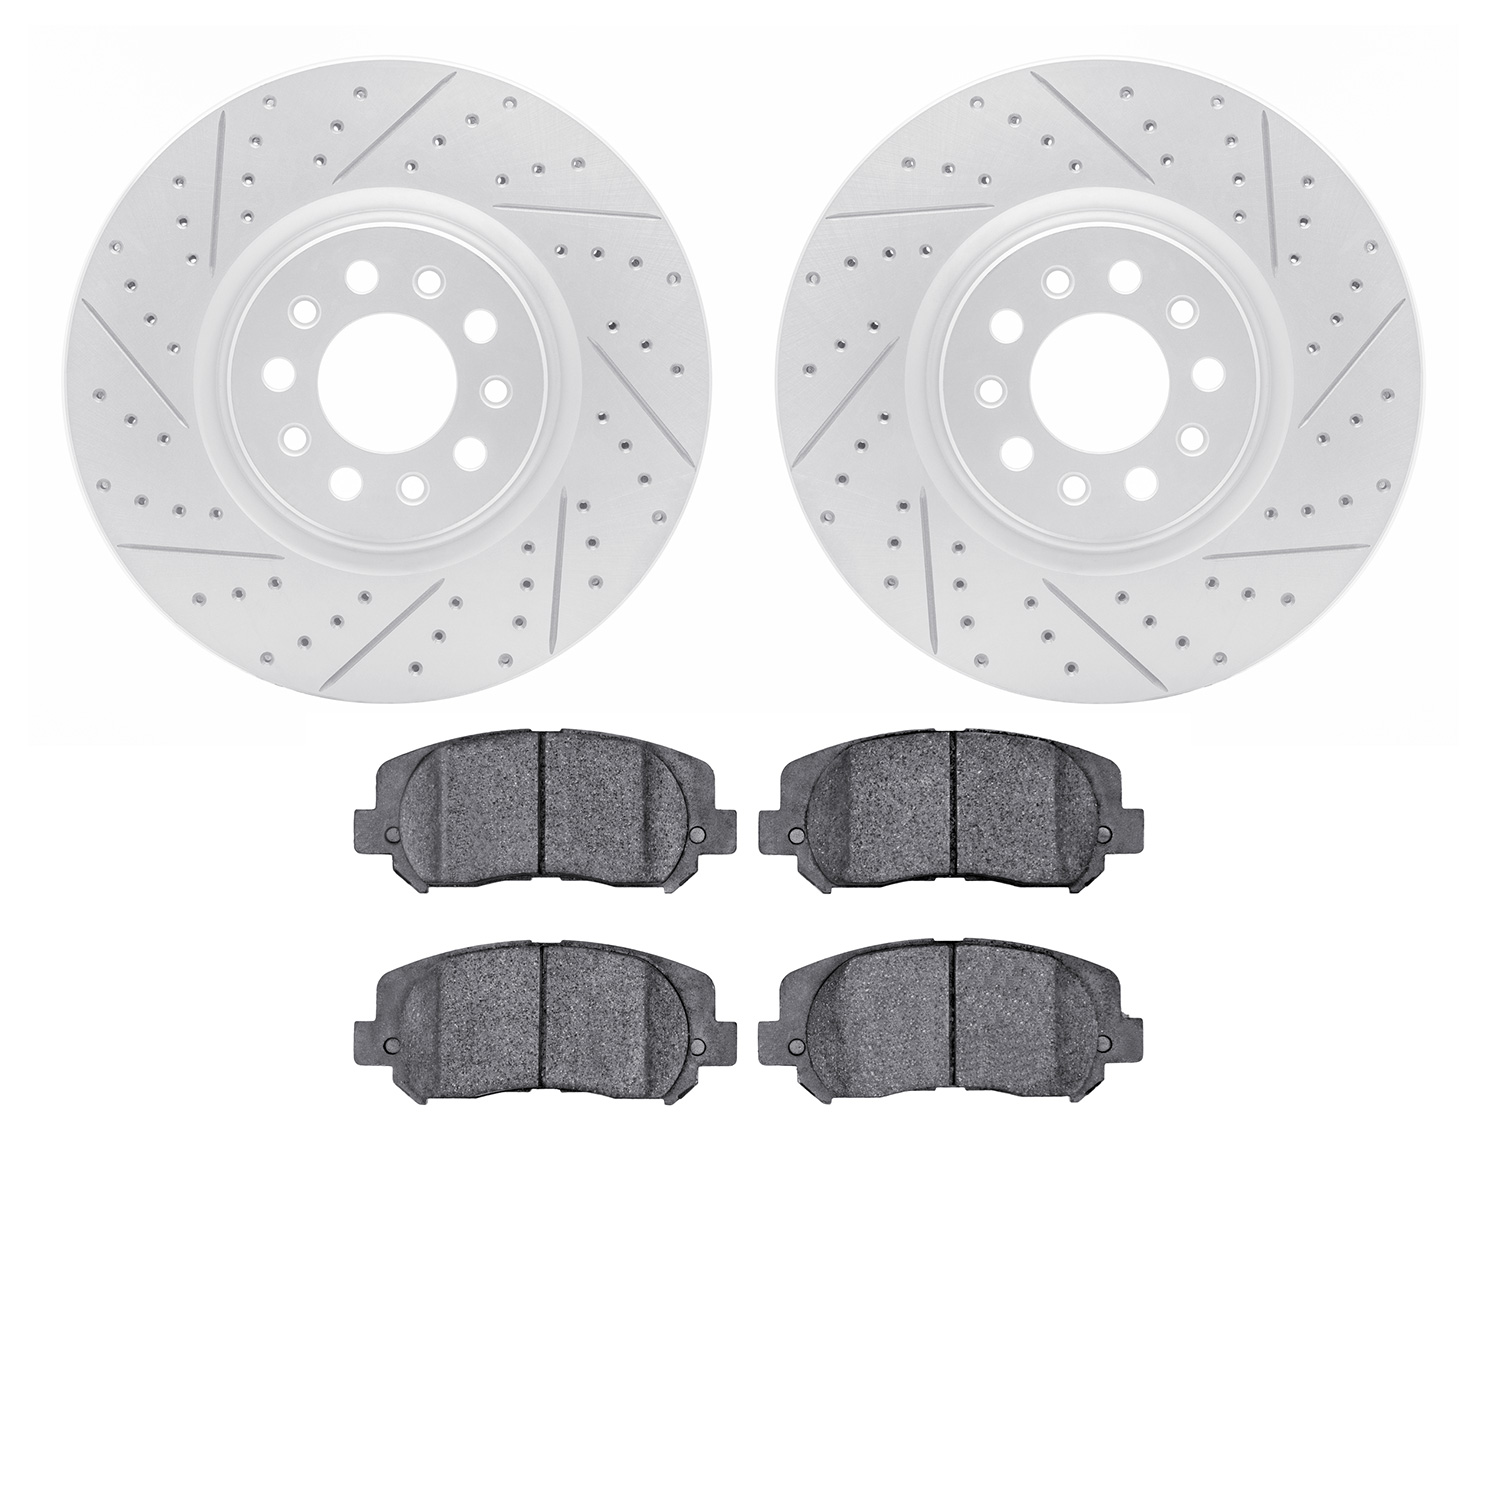 2402-42014 Geoperformance Drilled/Slotted Brake Rotors with Ultimate-Duty Brake Pads Kit, Fits Select Mopar, Position: Front